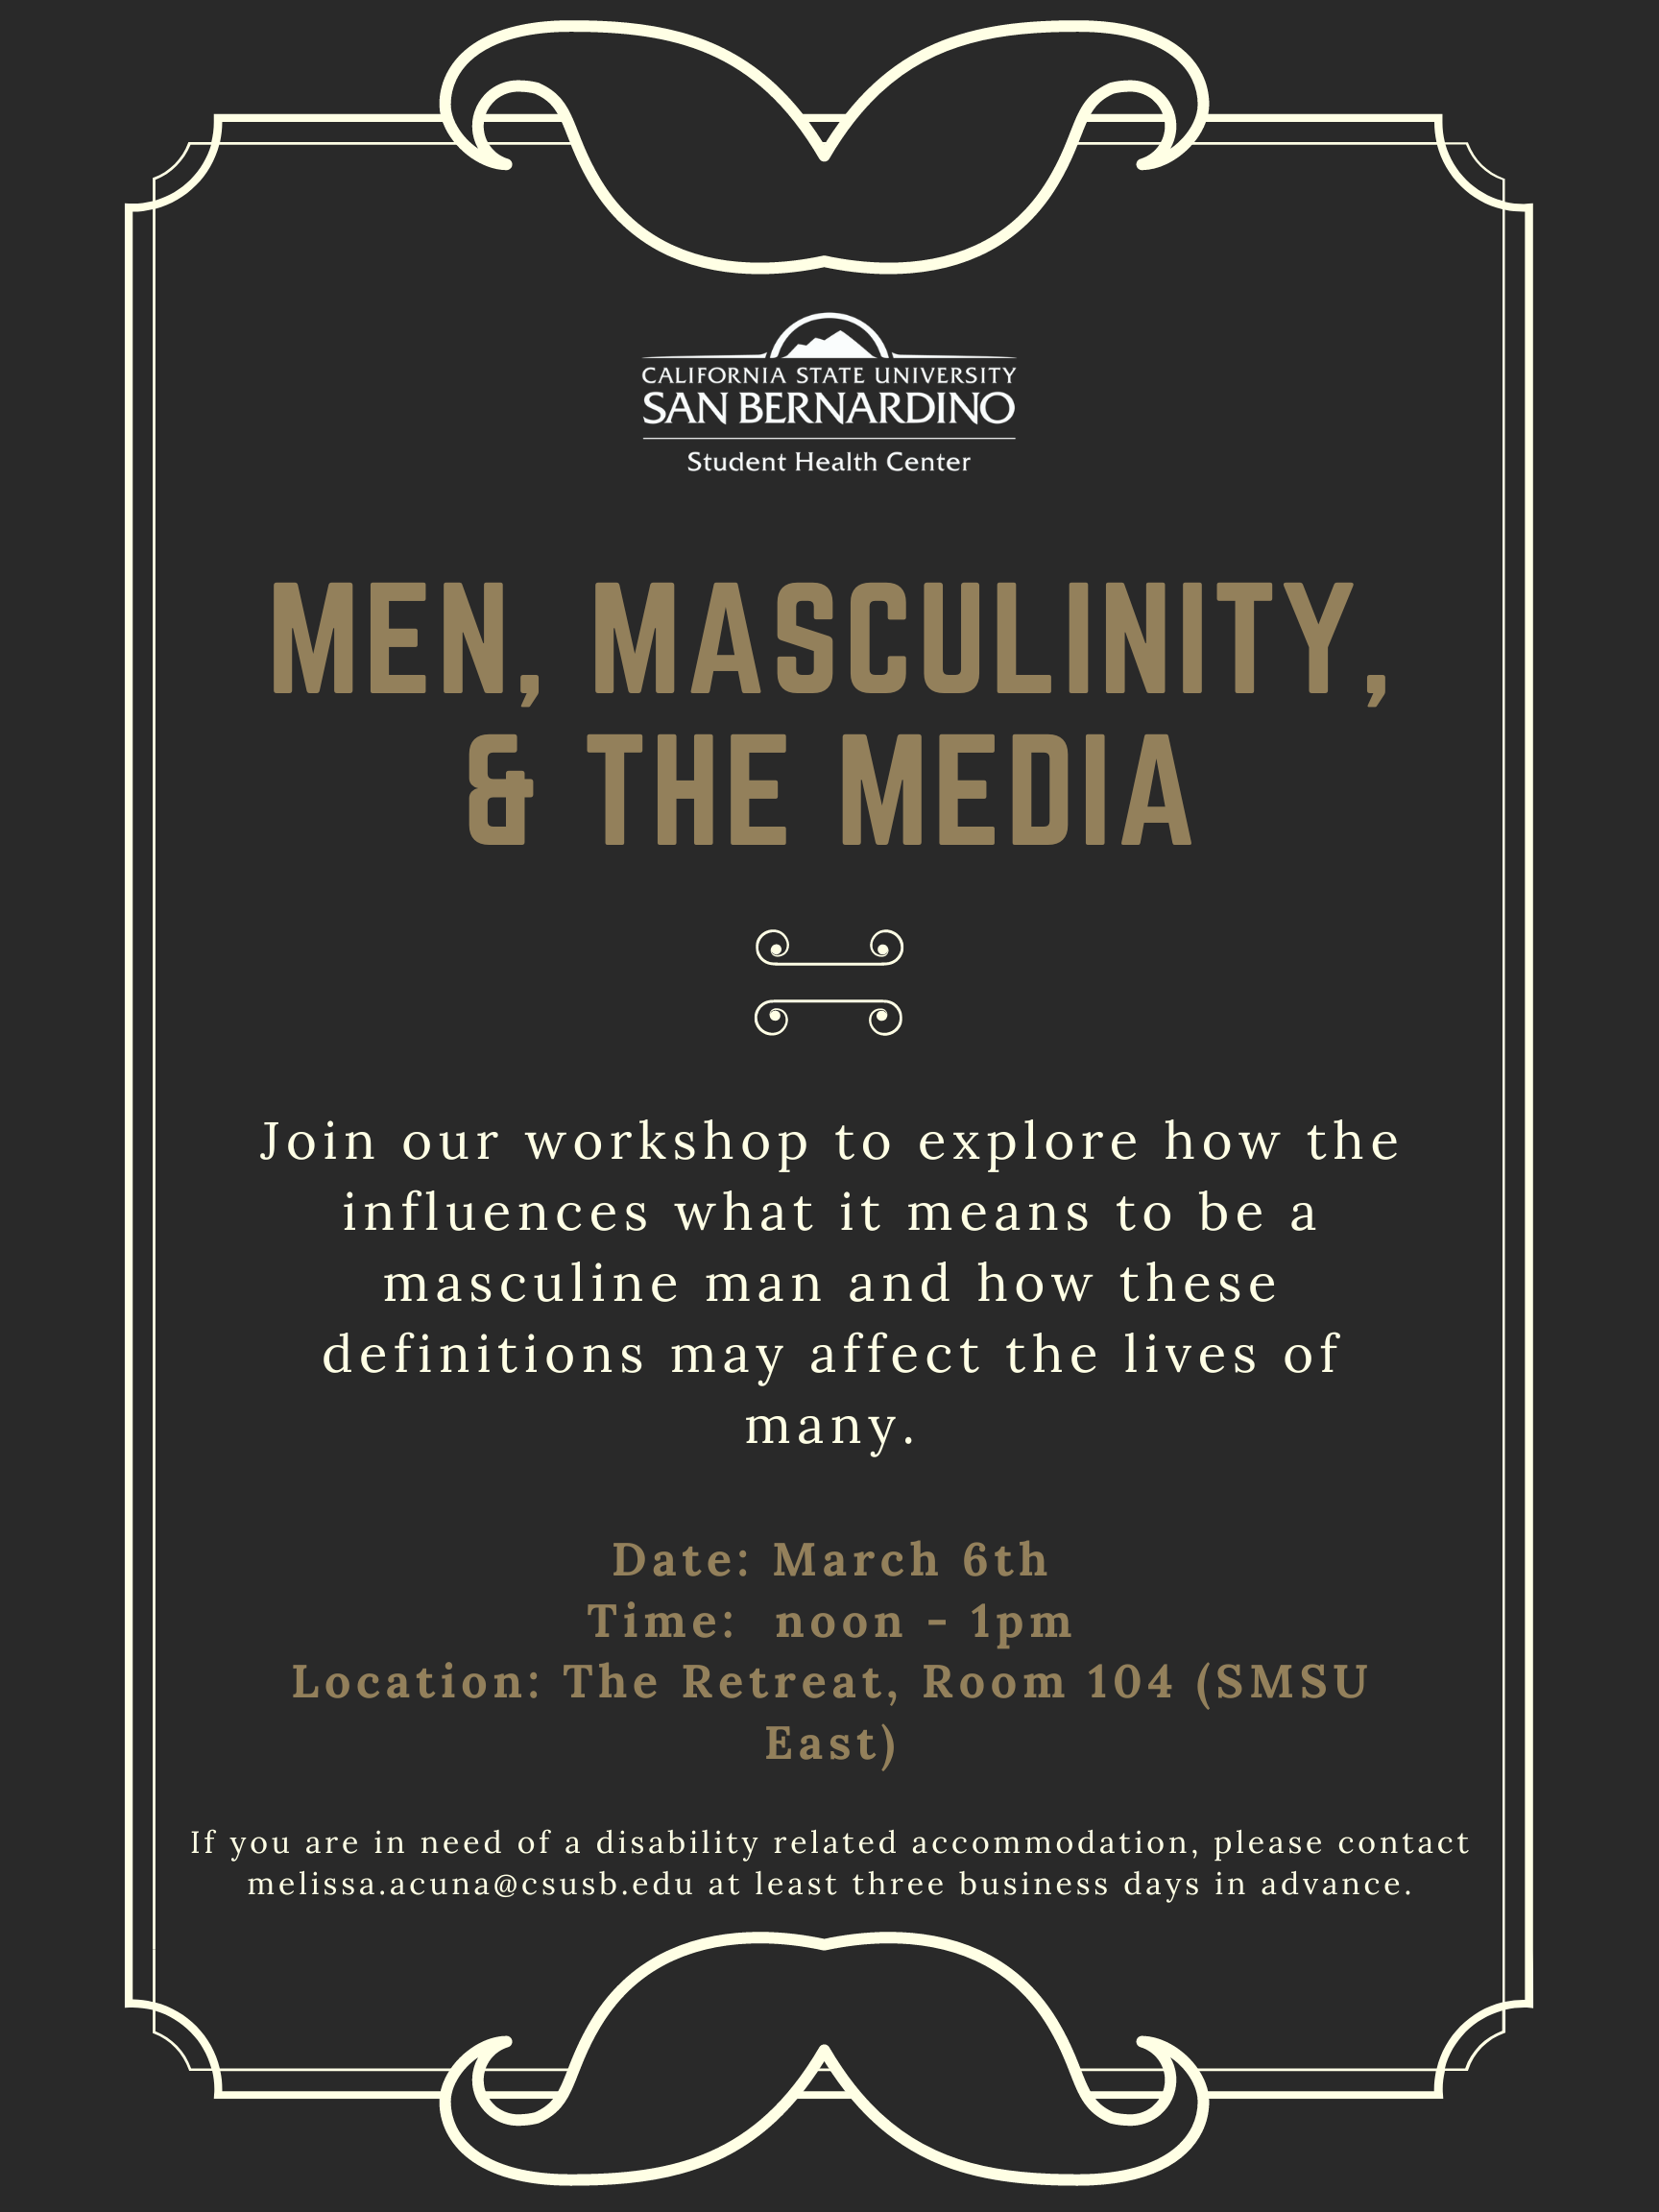 Men, Masculinity, & the Media Flyer. Reads: Join our workshop to explore how the influences what it means to be a masculine man and how these definitions may affect the lives of many. Date: March 6th Time:  noon - 1pm Location: The Retreat, Room 104 (SMSU East). If you are in need of a disability related accommodation, please contact melissa.acuna@csusb.edu at least three business days in advance.